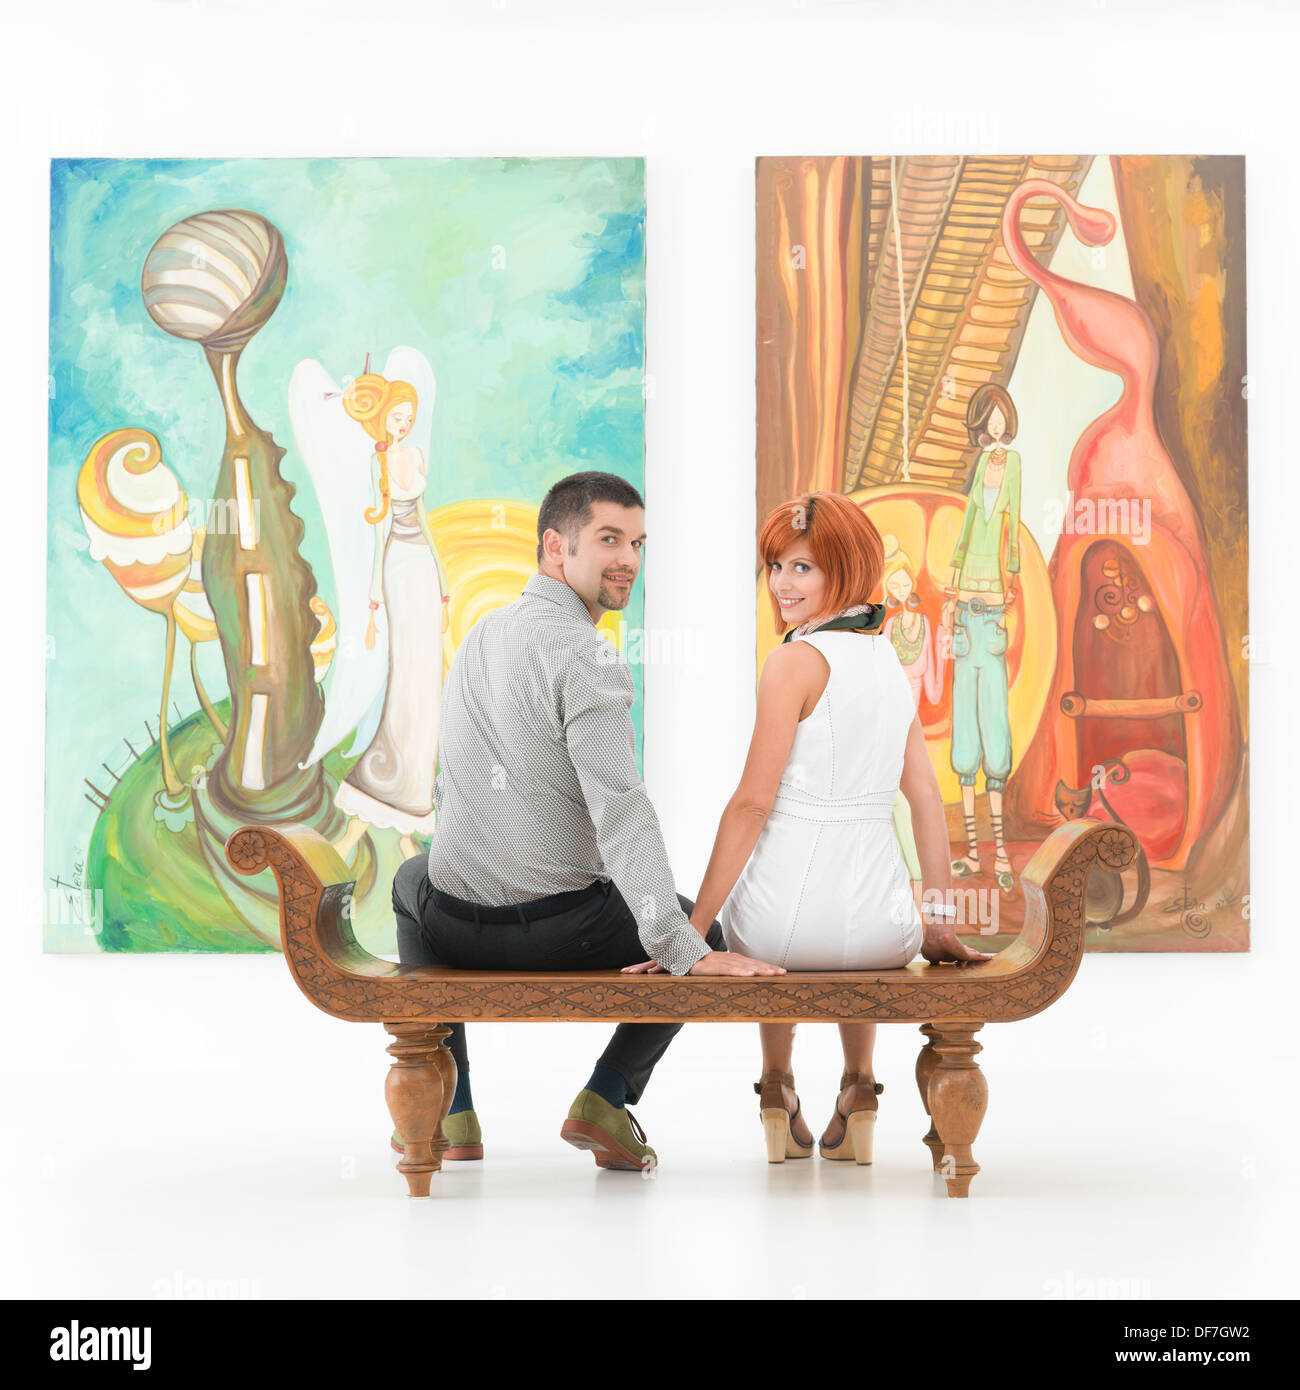 young couple sitting on a wooden bench in front of large colorful paintings holding hands and smiling Stock Photo